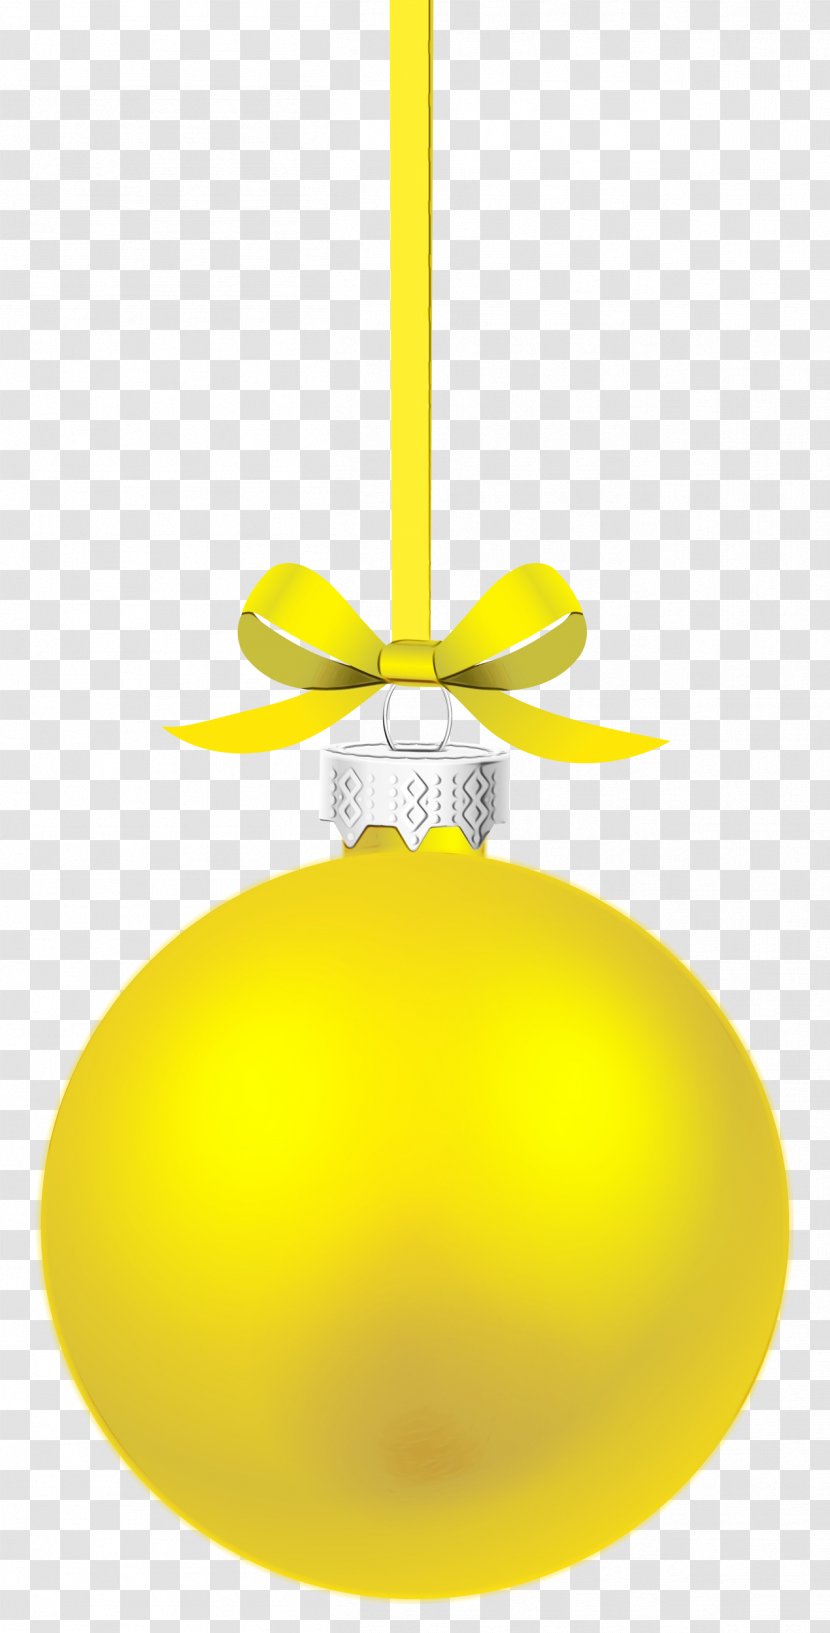 Christmas Circle - Ceiling - Sphere Ornament Transparent PNG